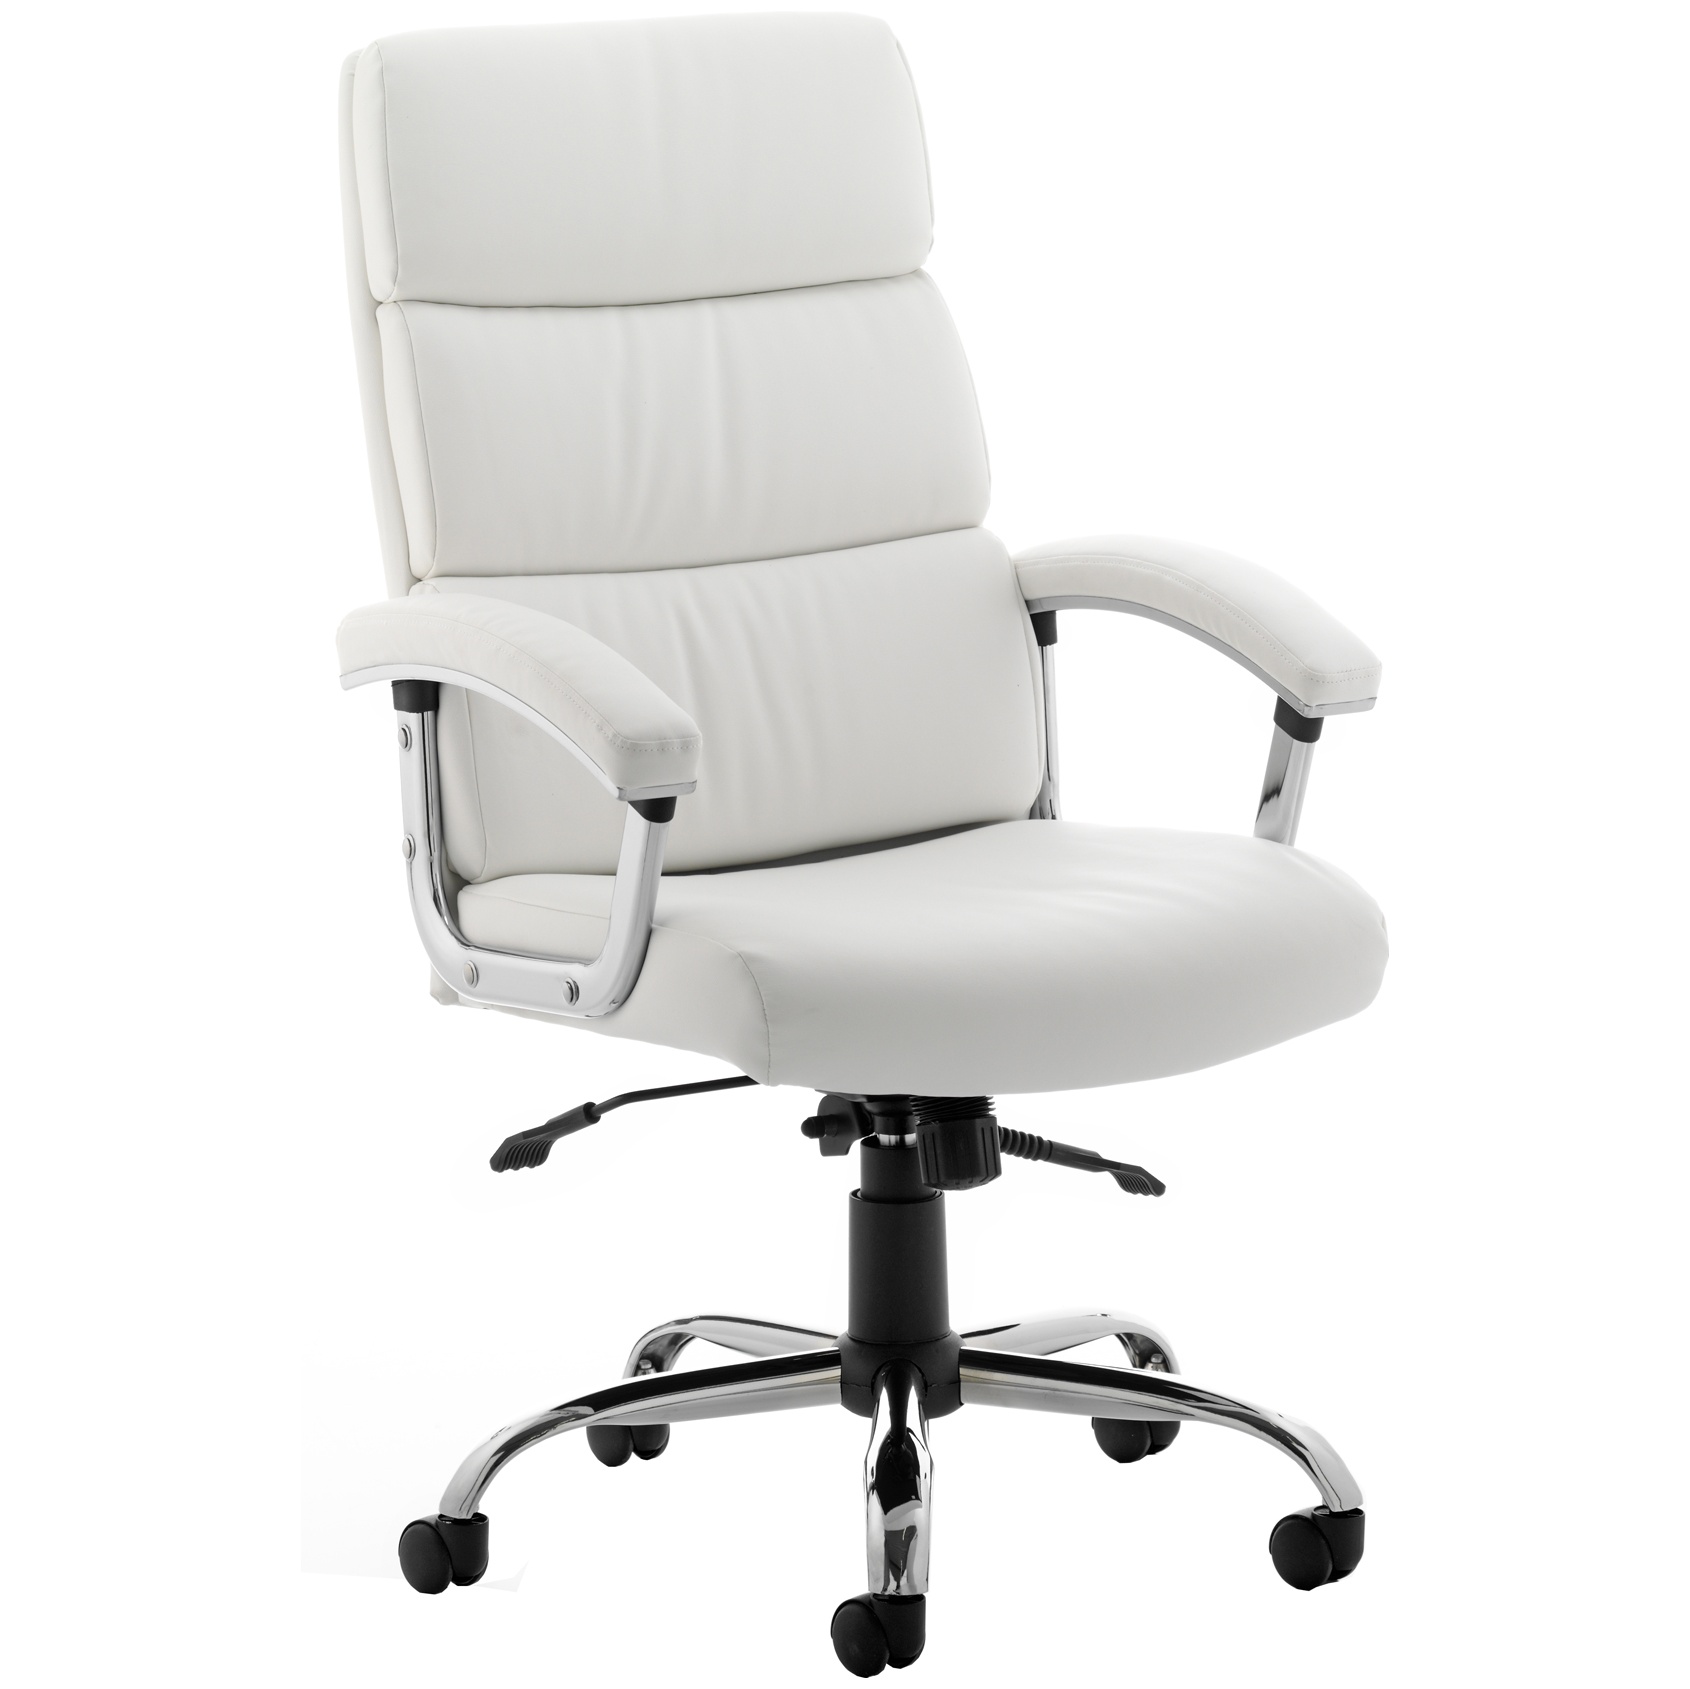 Malo Enviro Leather Executive Chair White Executive Office Chairs